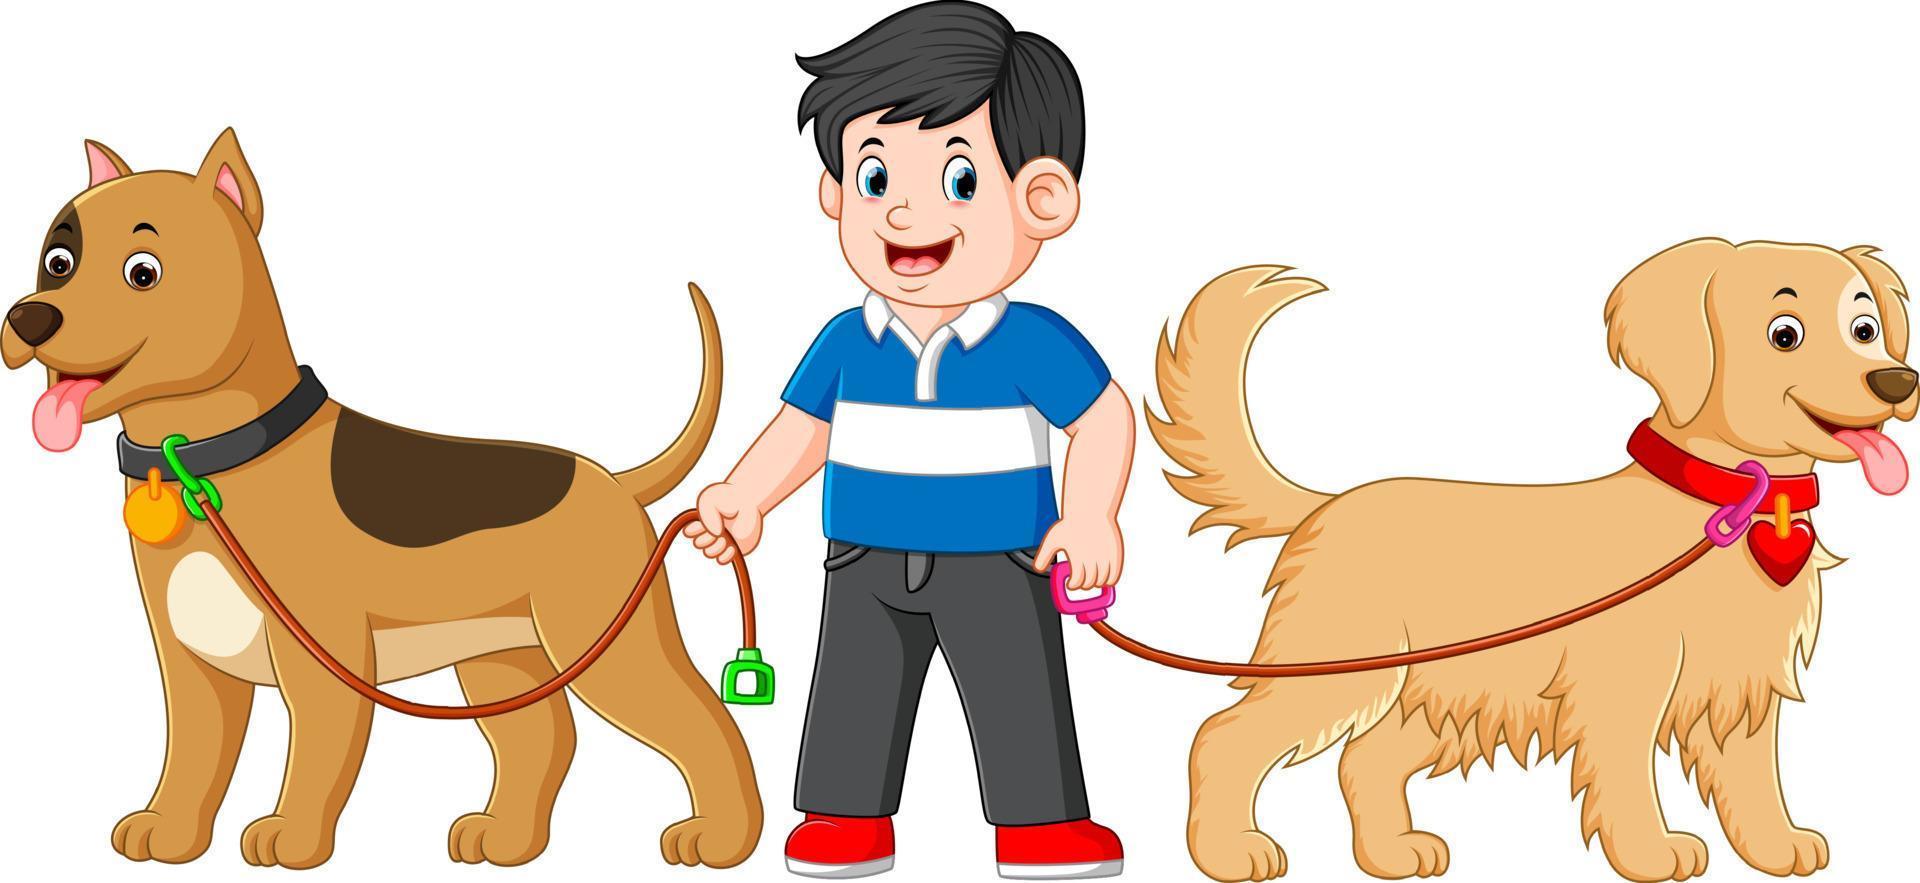 a boy is standing between two big cute dog and using a blue shirt vector